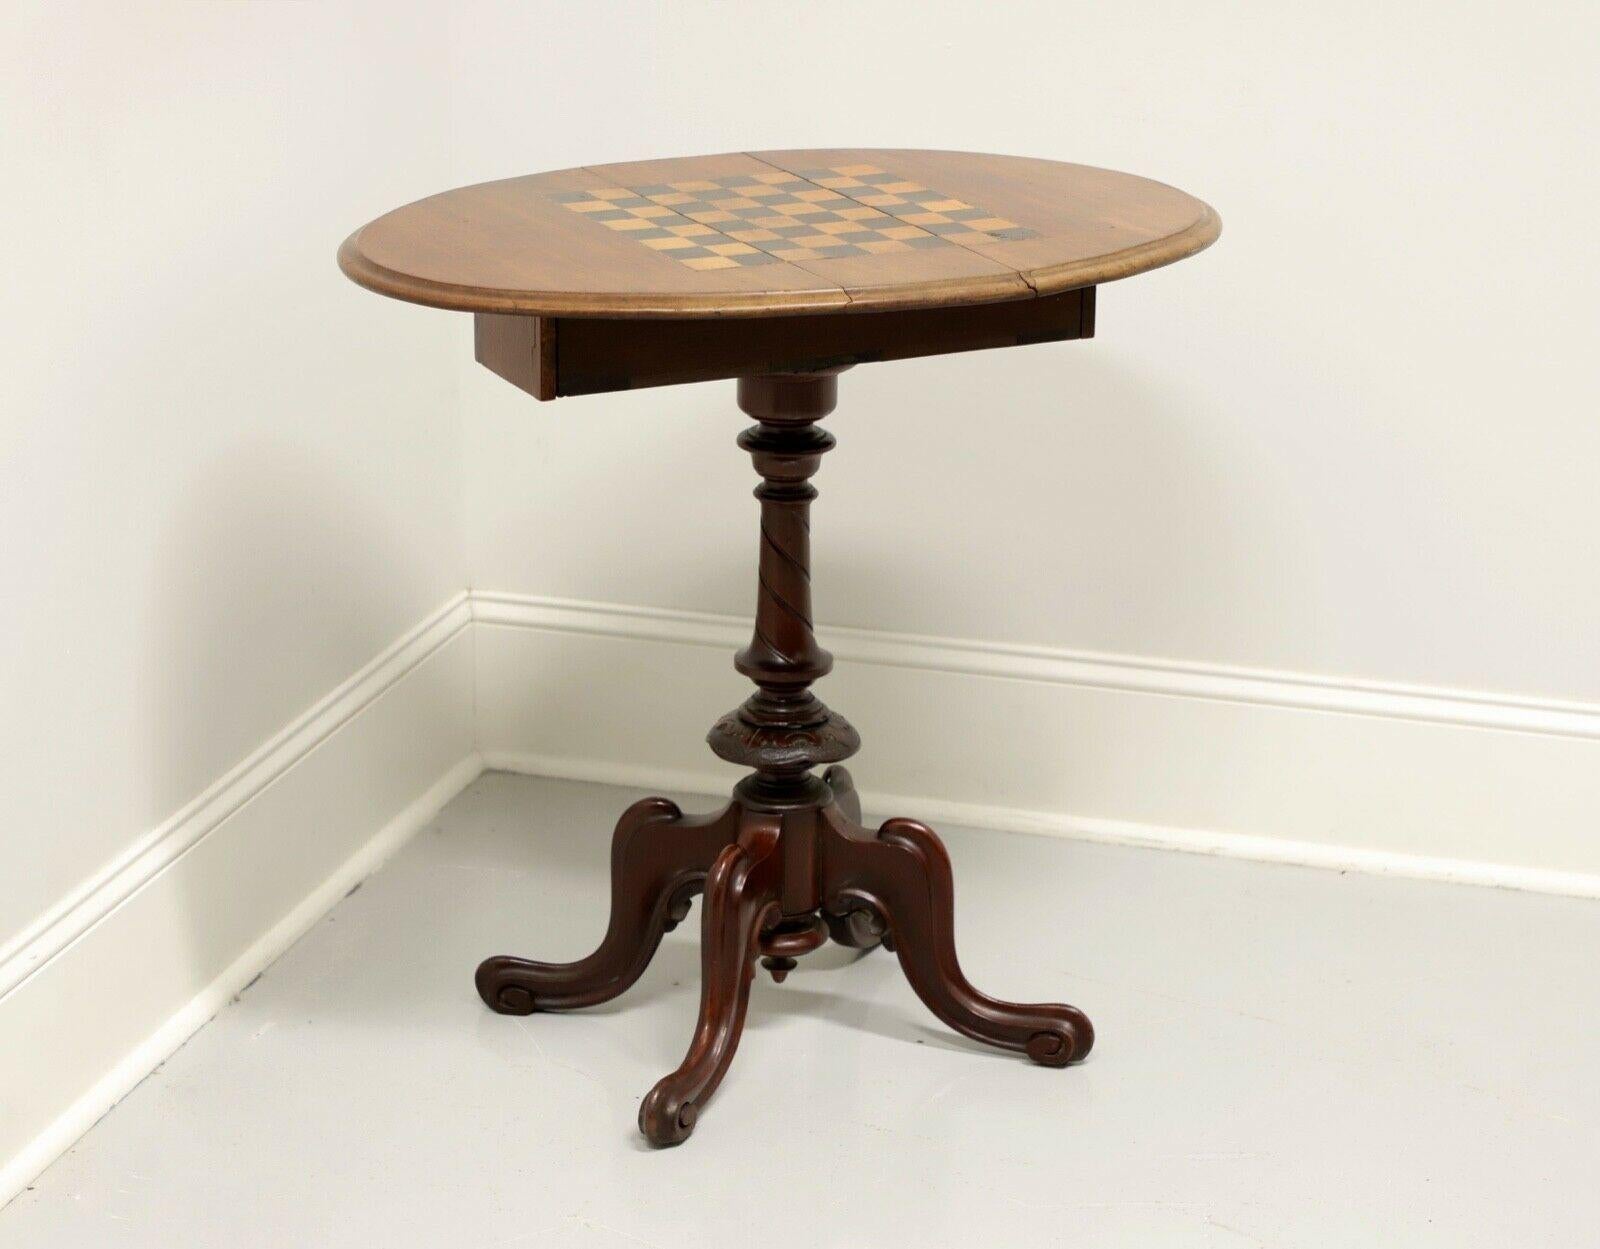 An antique Victorian drop leaf game table, unbranded. Walnut with inlaid game board to top and turned pedestal base with four curved legs. Features drop leaf top that folds up and swivels to form oval games surface. Two drawers provide storage for